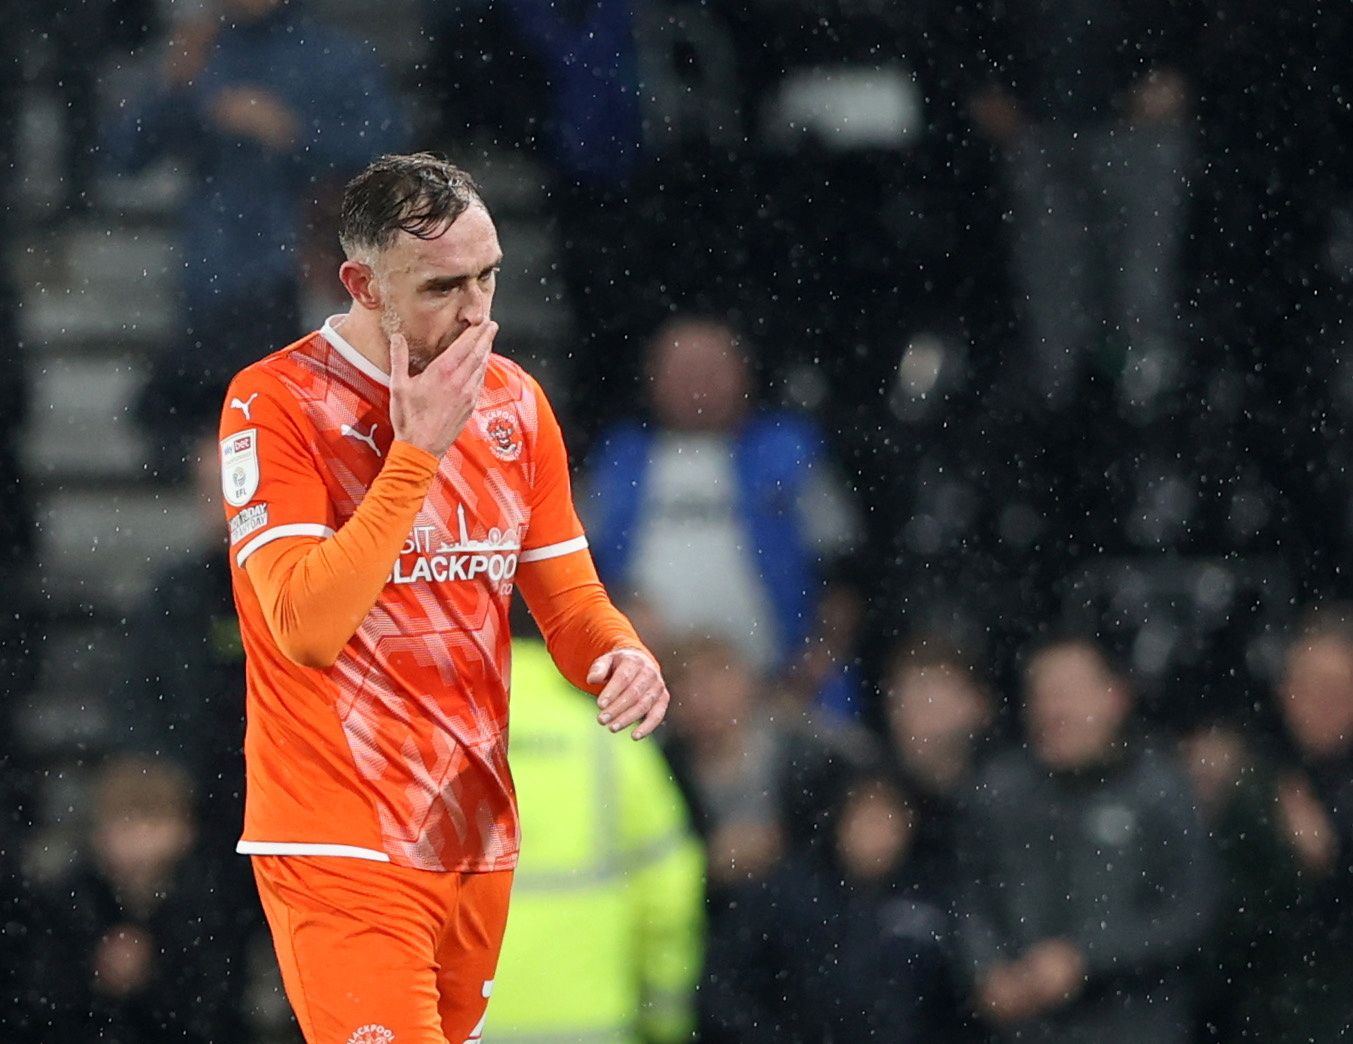 Soccer Football - Championship - Derby County v Blackpool - Pride Park, Derby, Britain - December 11, 2021  Blackpool's Richard Keogh after the match   Action Images/Molly Darlington  EDITORIAL USE ONLY. No use with unauthorized audio, video, data, fixture lists, club/league logos or 